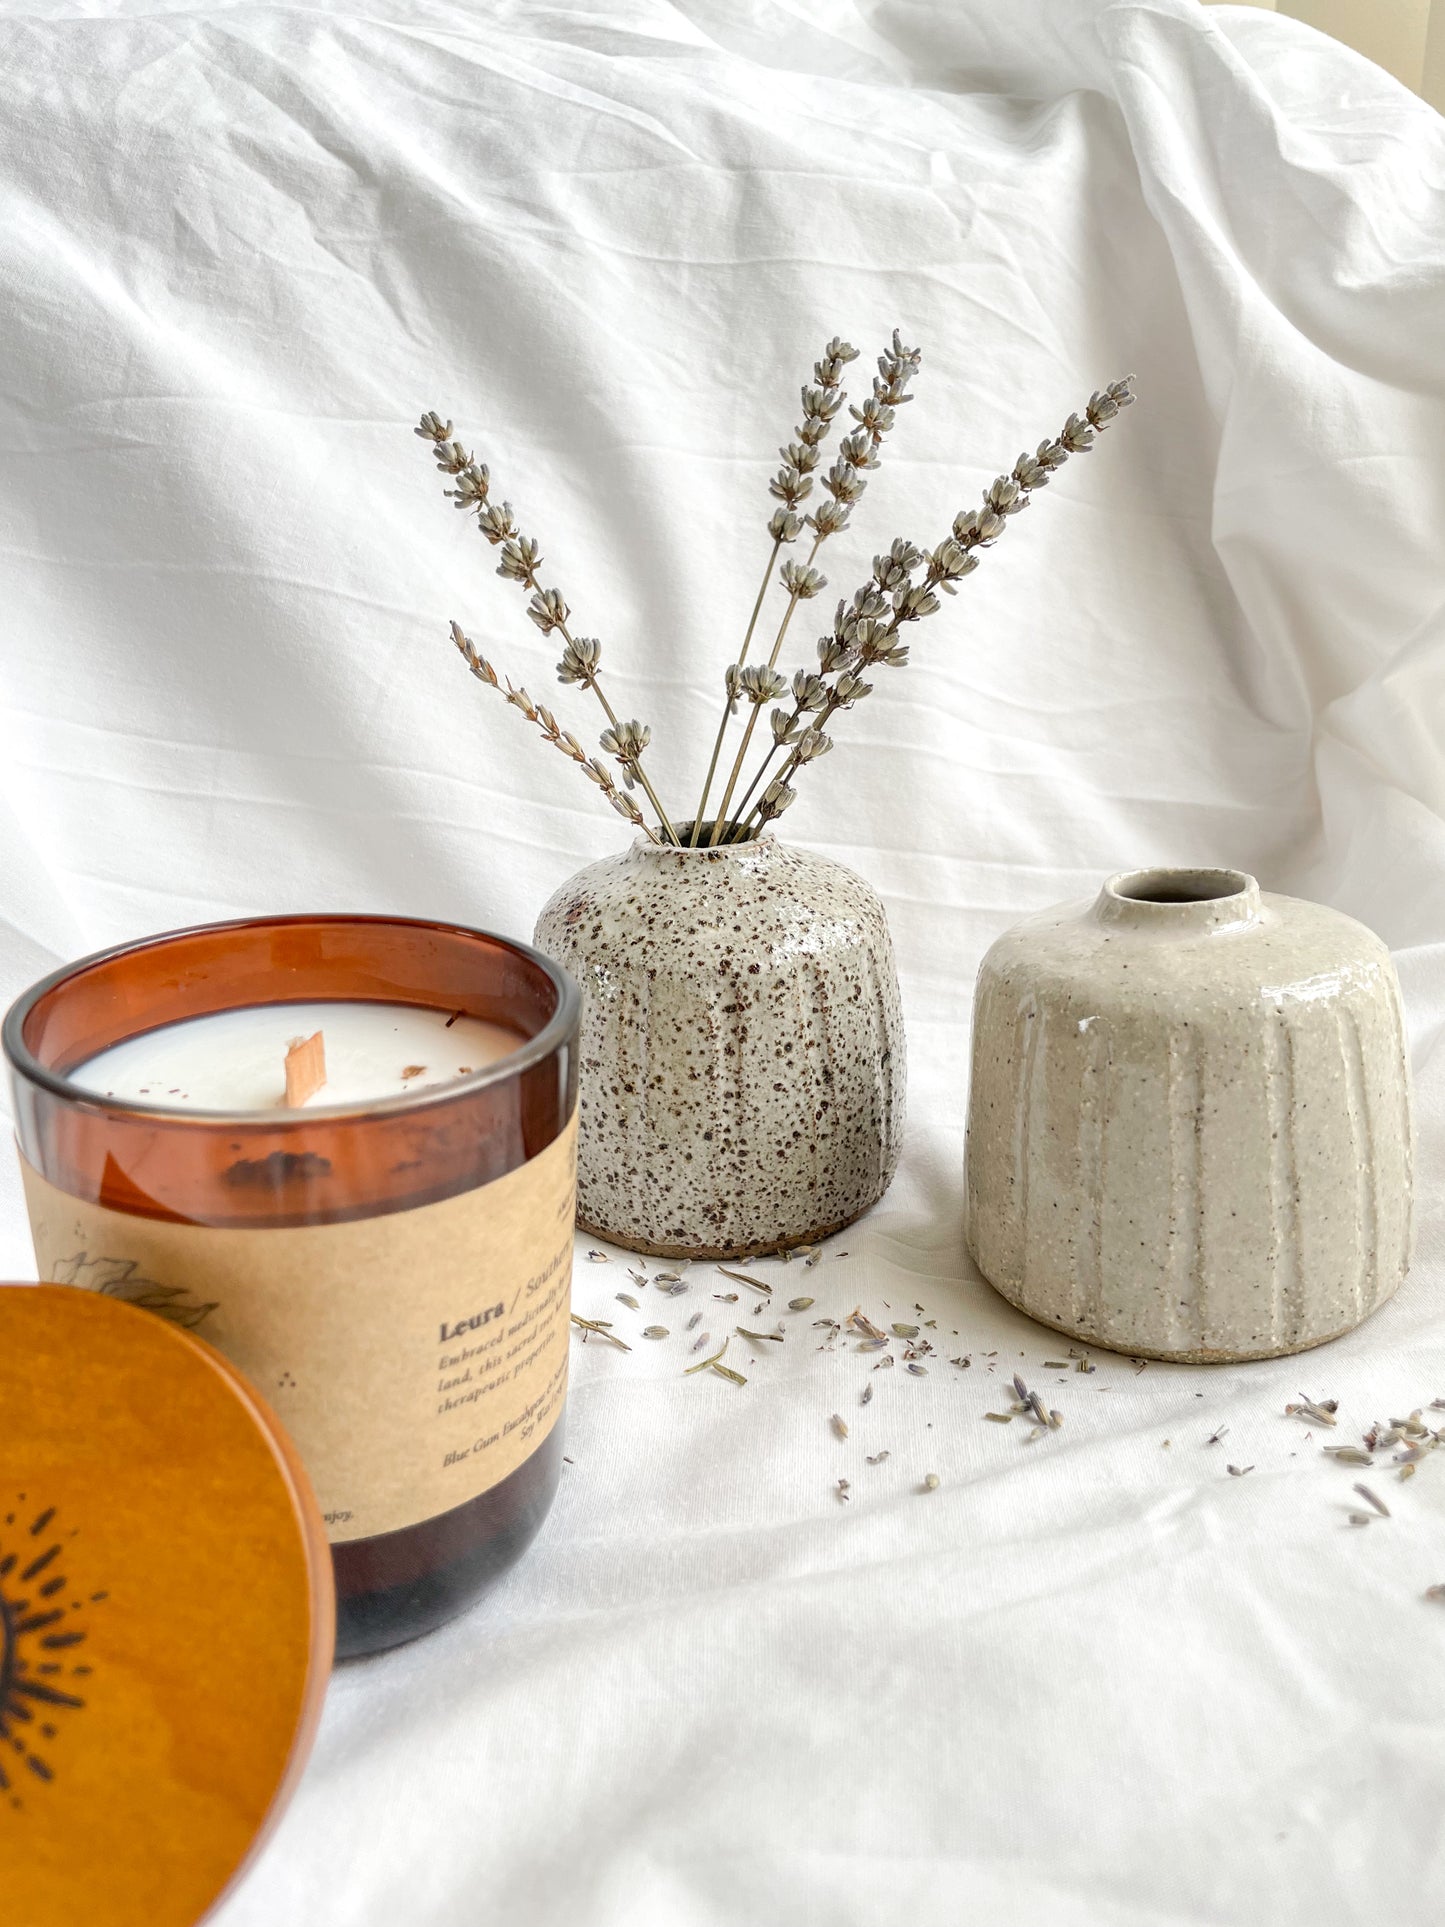 Leura scented soywax candle styled with Hazel small handmade ceramic vases and died Lavender